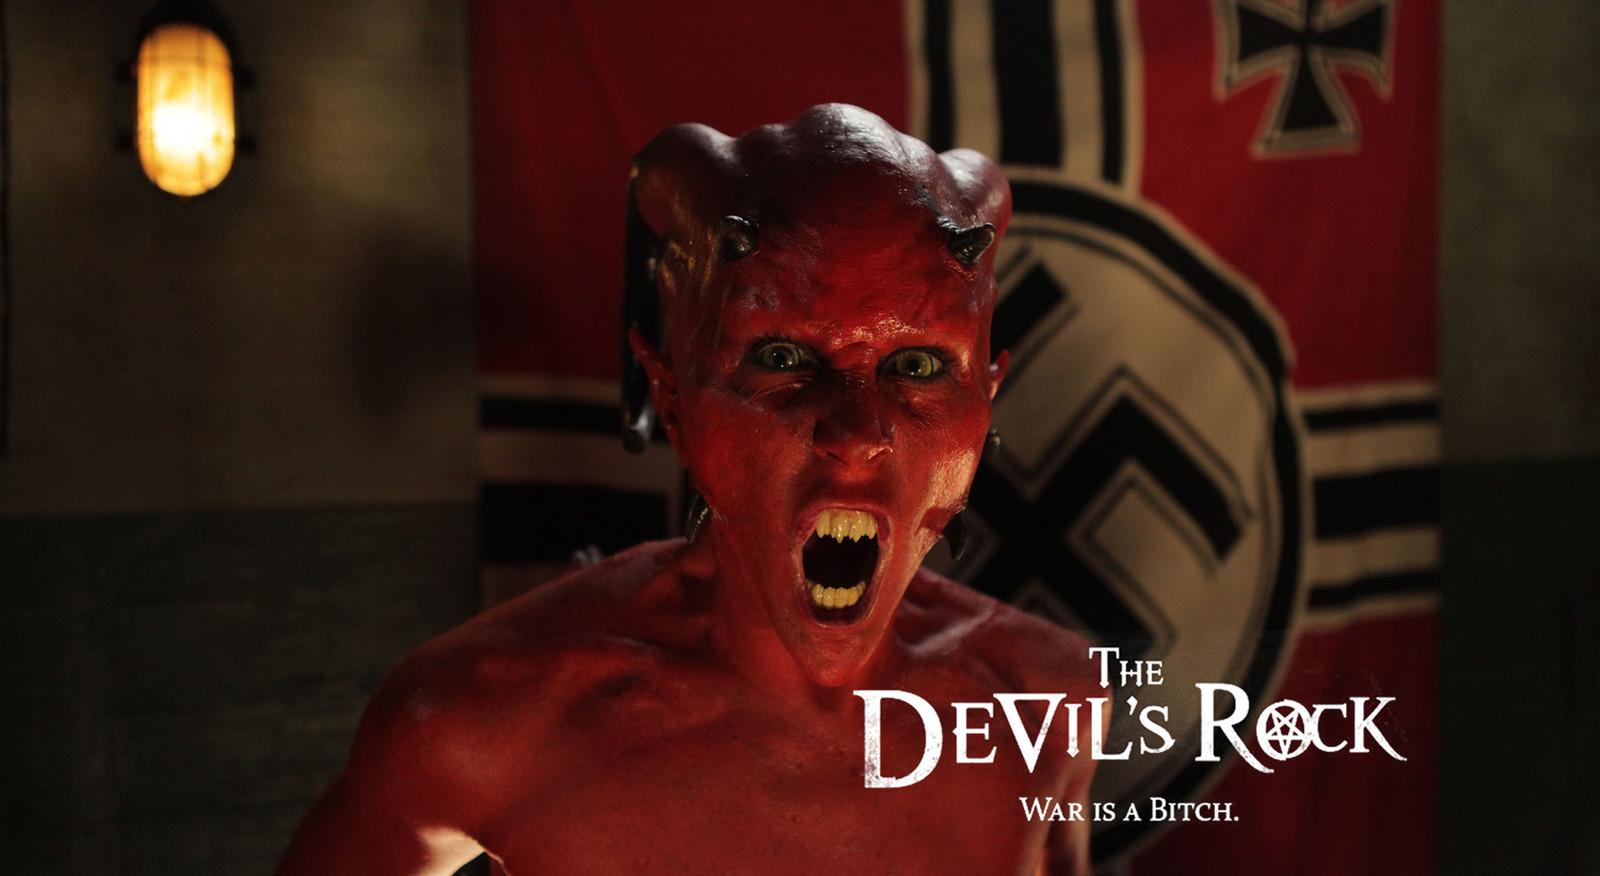 The Devils Rock, Directed by Paul Campion